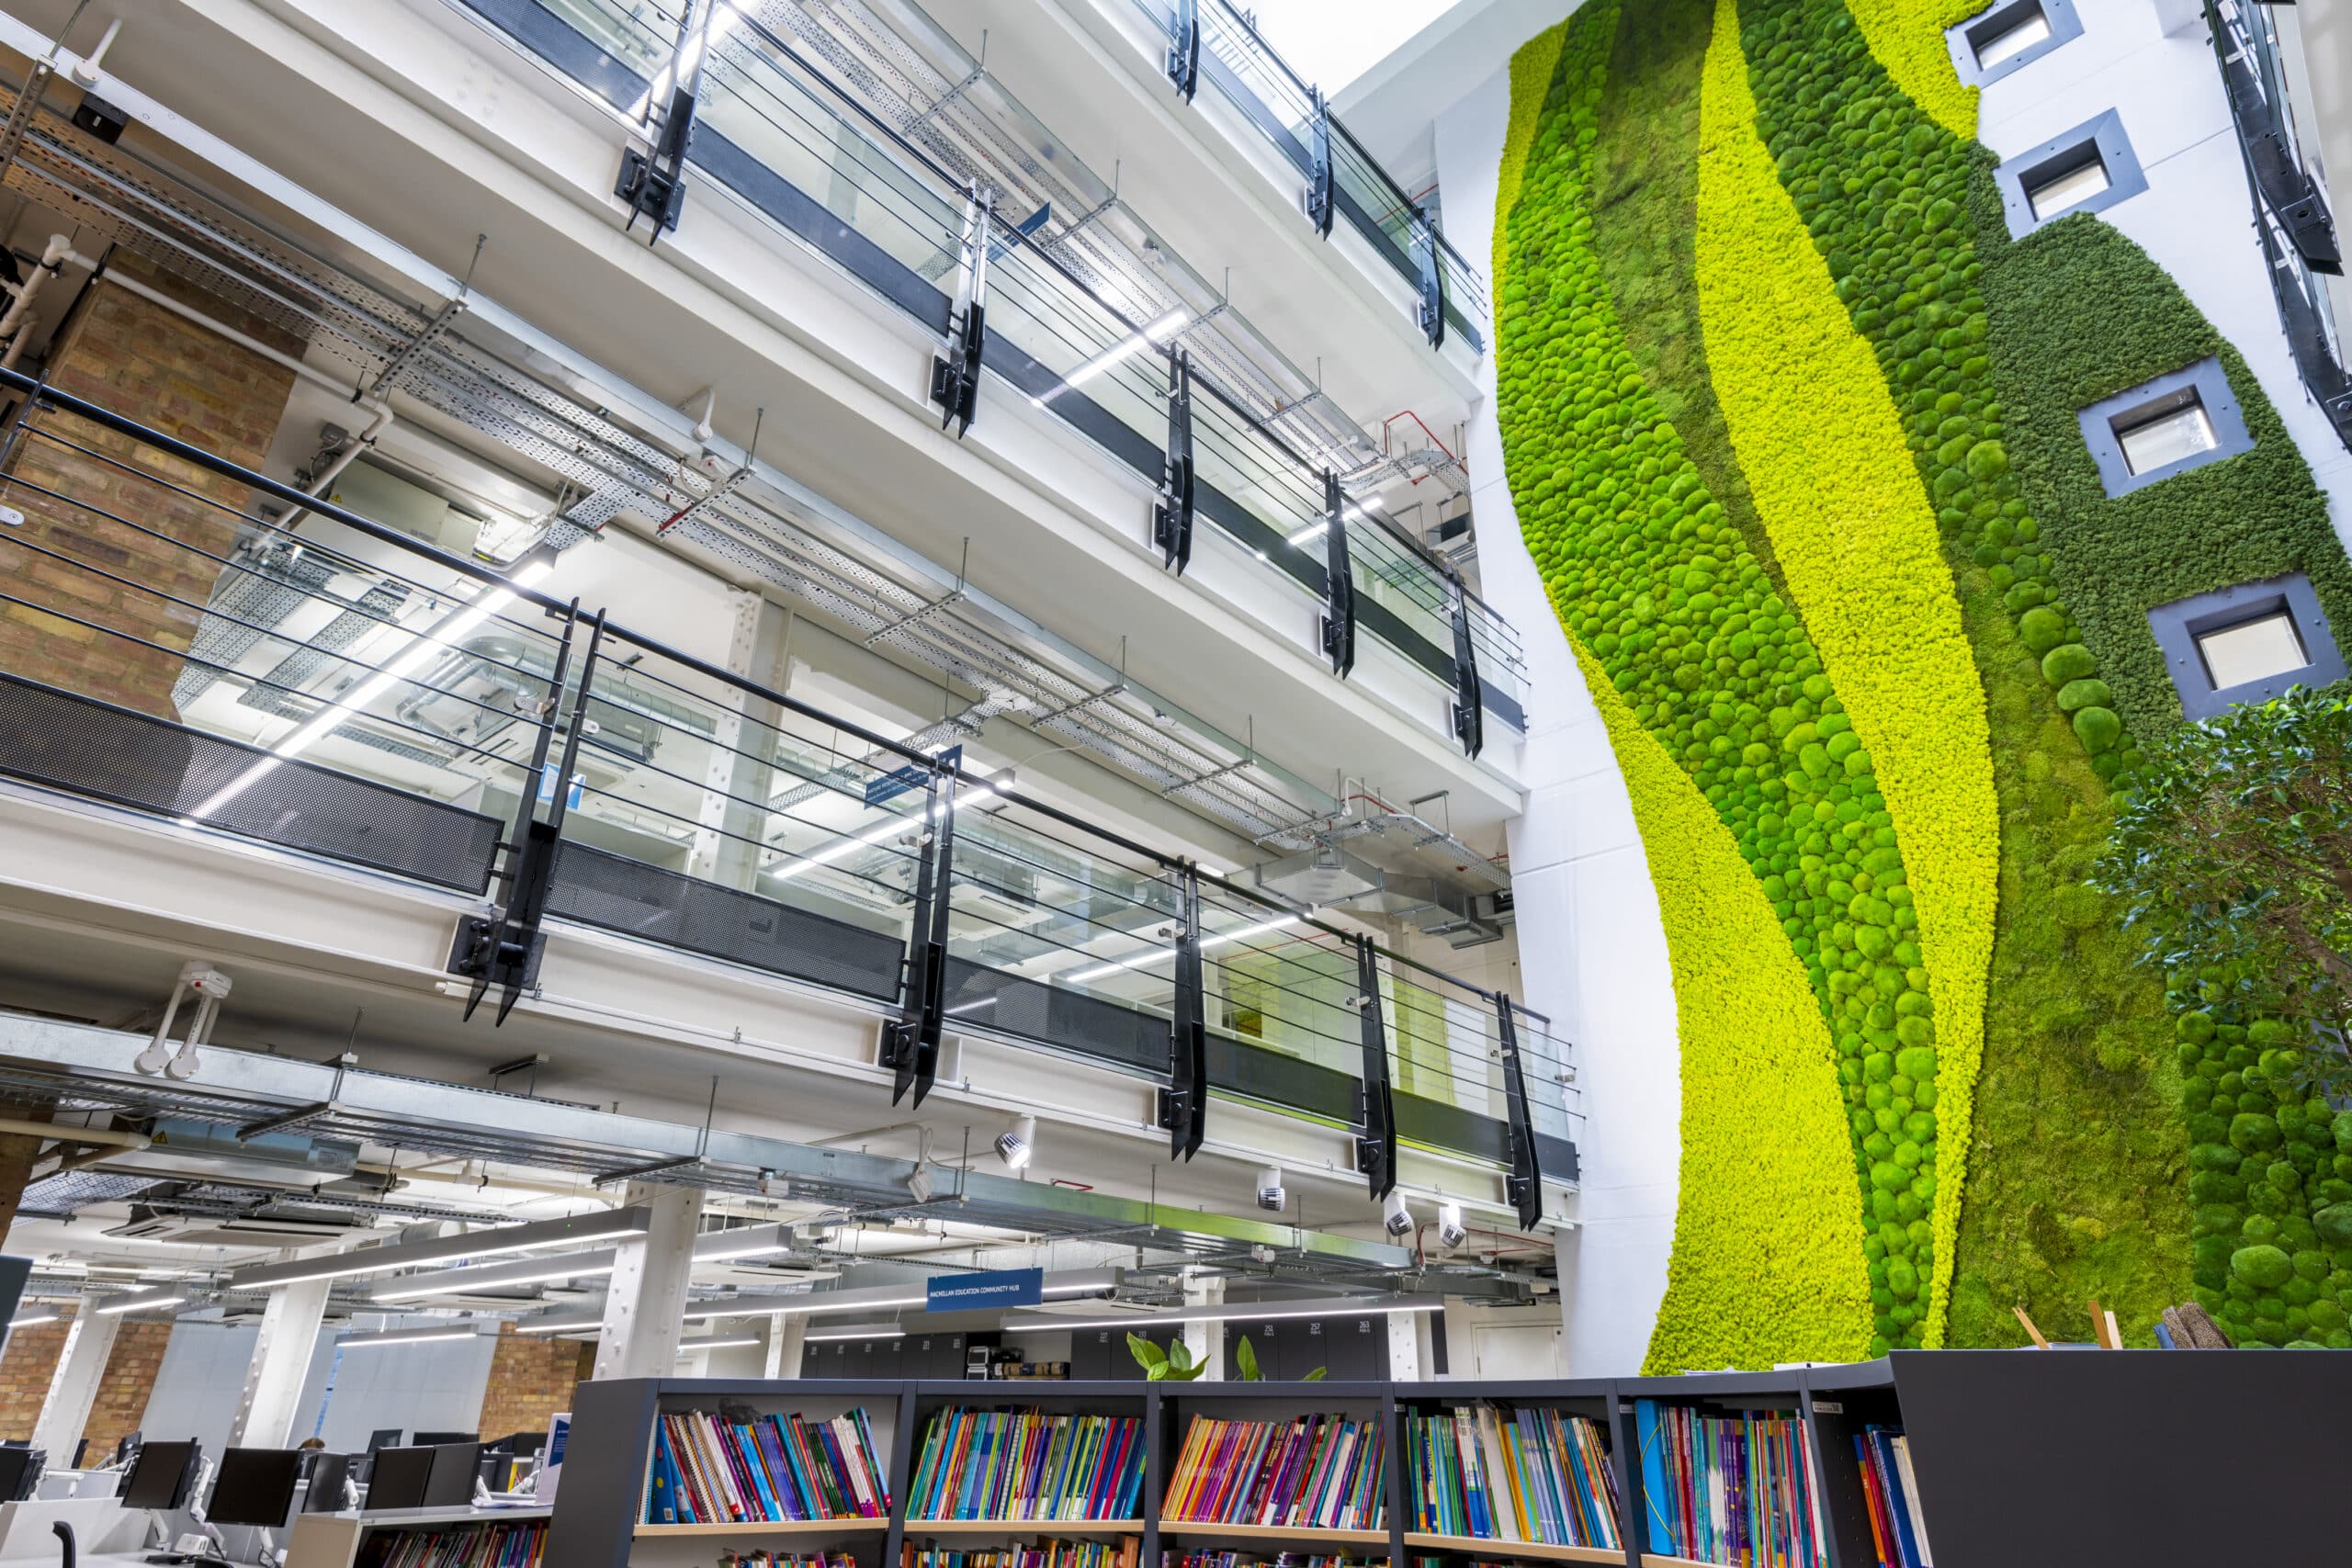 Sustainable lighting featured in the Mount Lighting offices